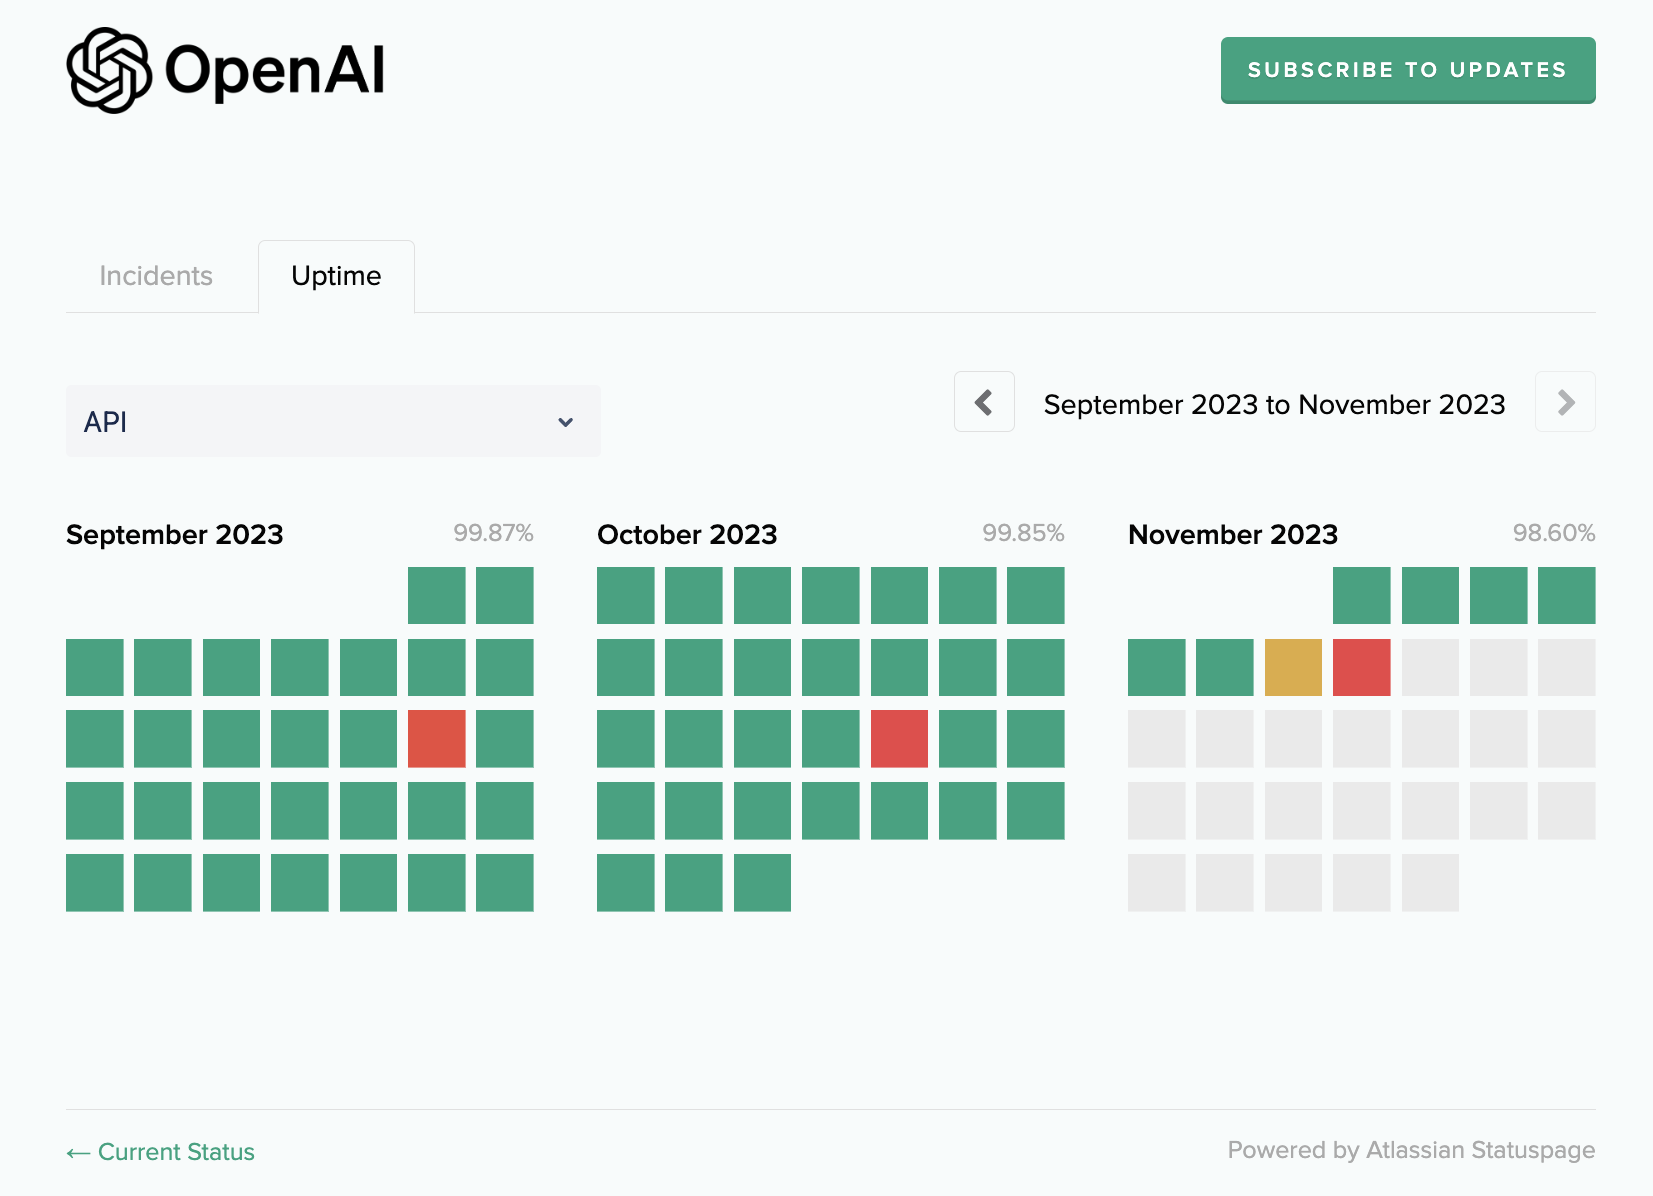 openai outages over past three months